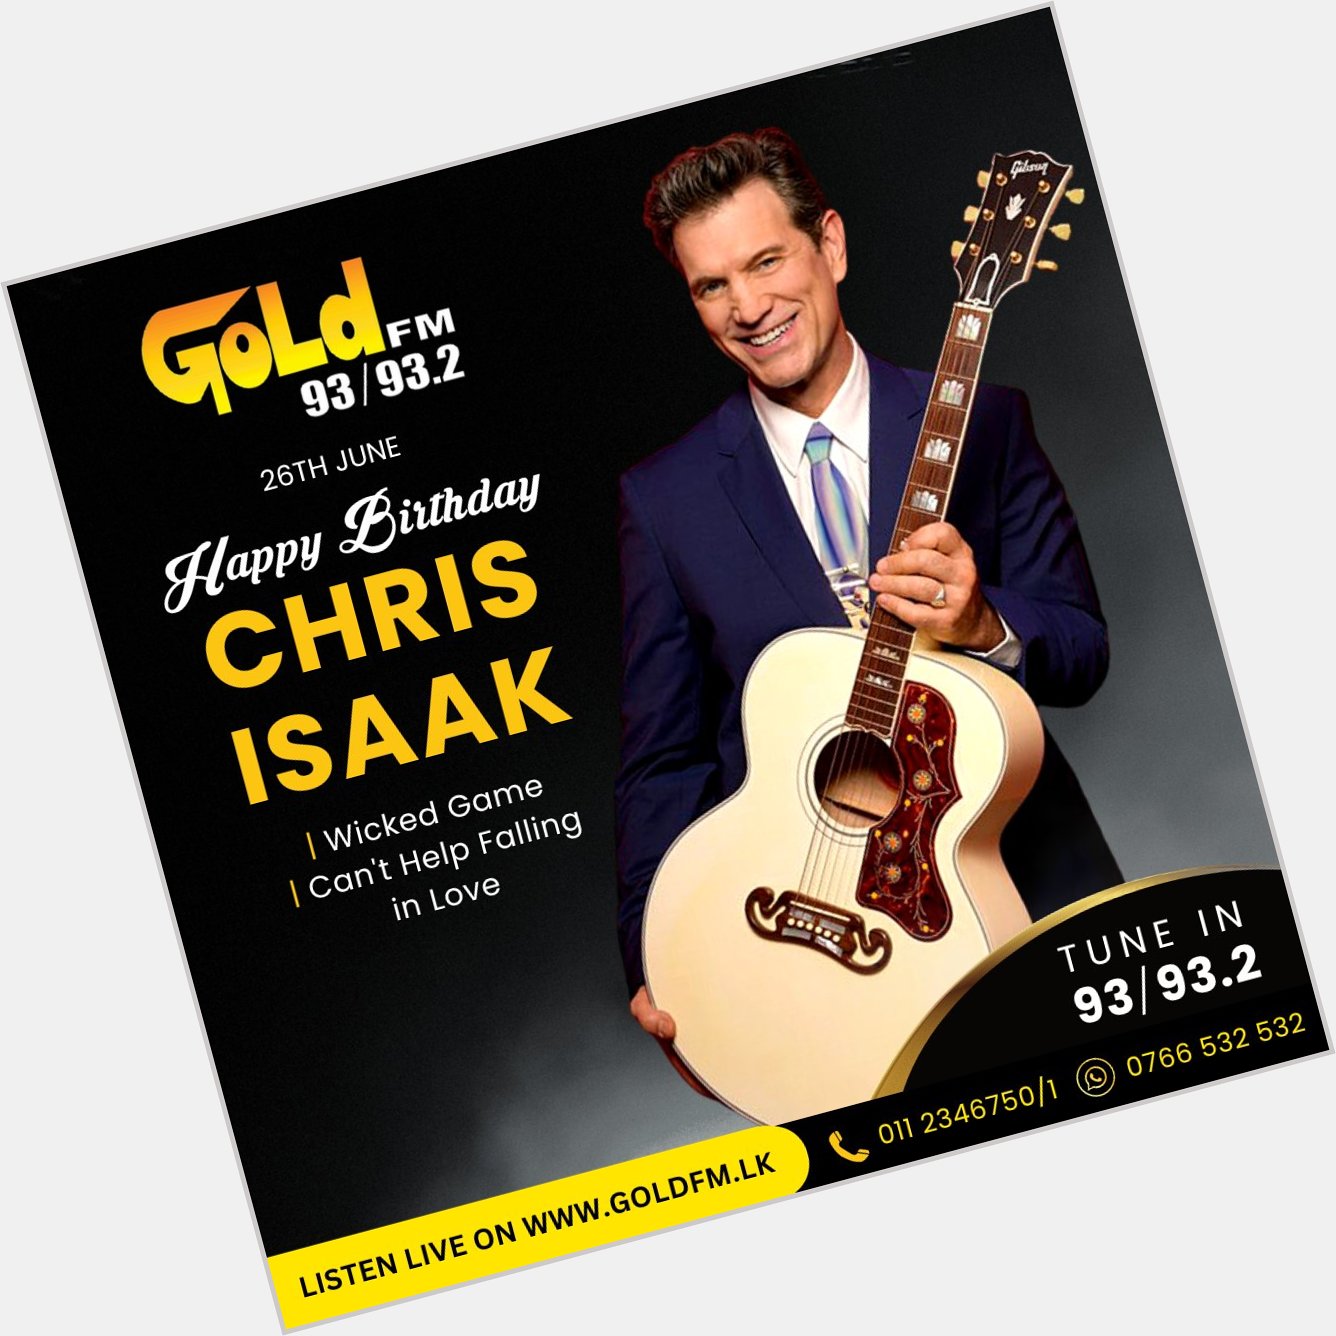 HAPPY BIRTHDAY TO CHRIS ISAAK TUNE IN 93 / 93.2 Island wide    